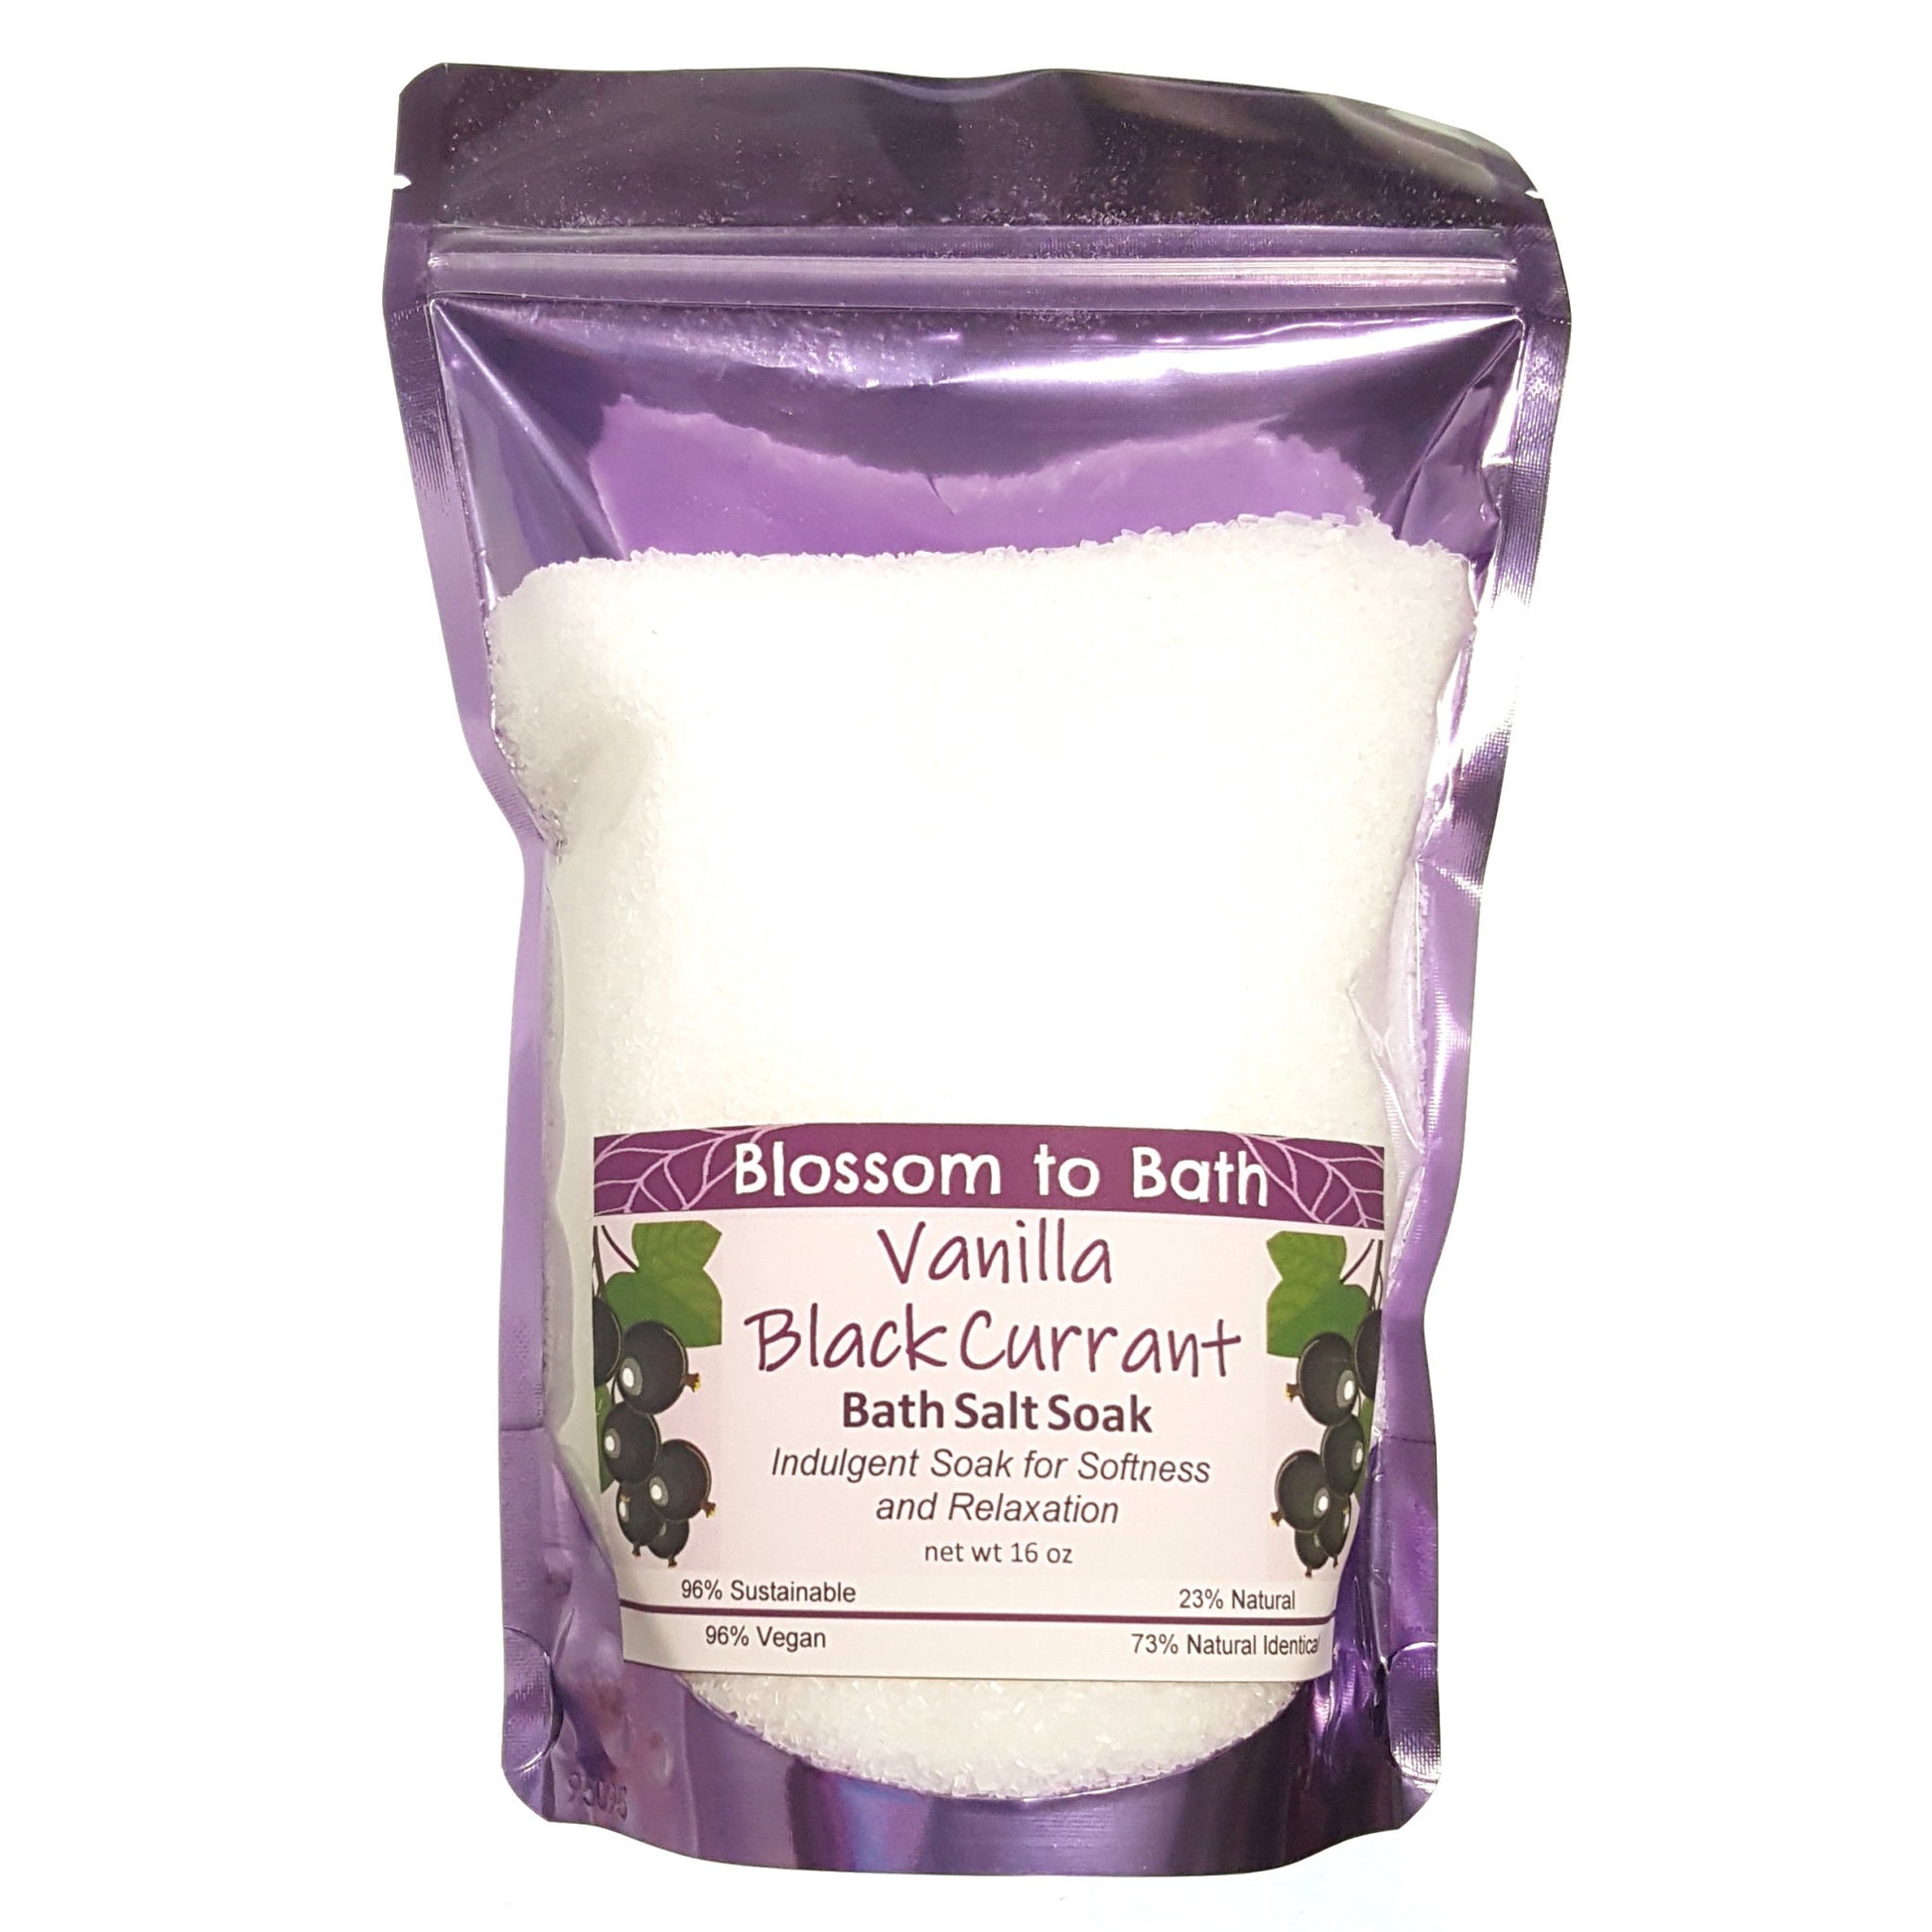 Buy Blossom to Bath Vanilla Black Currant Bath Salt Soak from Flowersong Soap Studio.  Scented epsom salts for a luxurious soaking experience  A sensuous rich berry scent with a hint of vanilla and a twist of freshness.